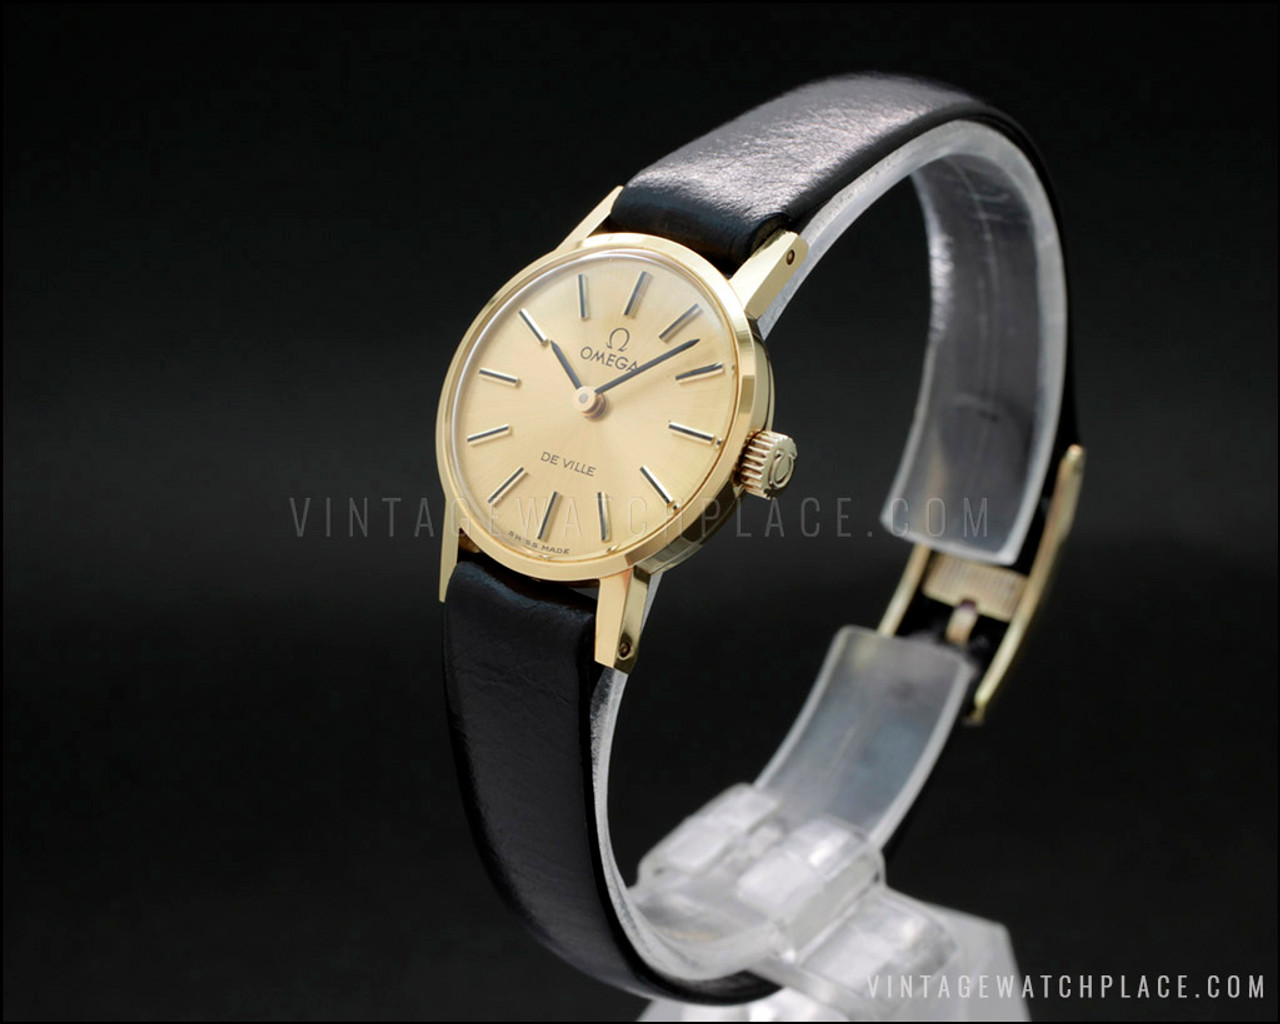 New Old Stock Omega De Ville BA 511.390, 18K solid yellow gold